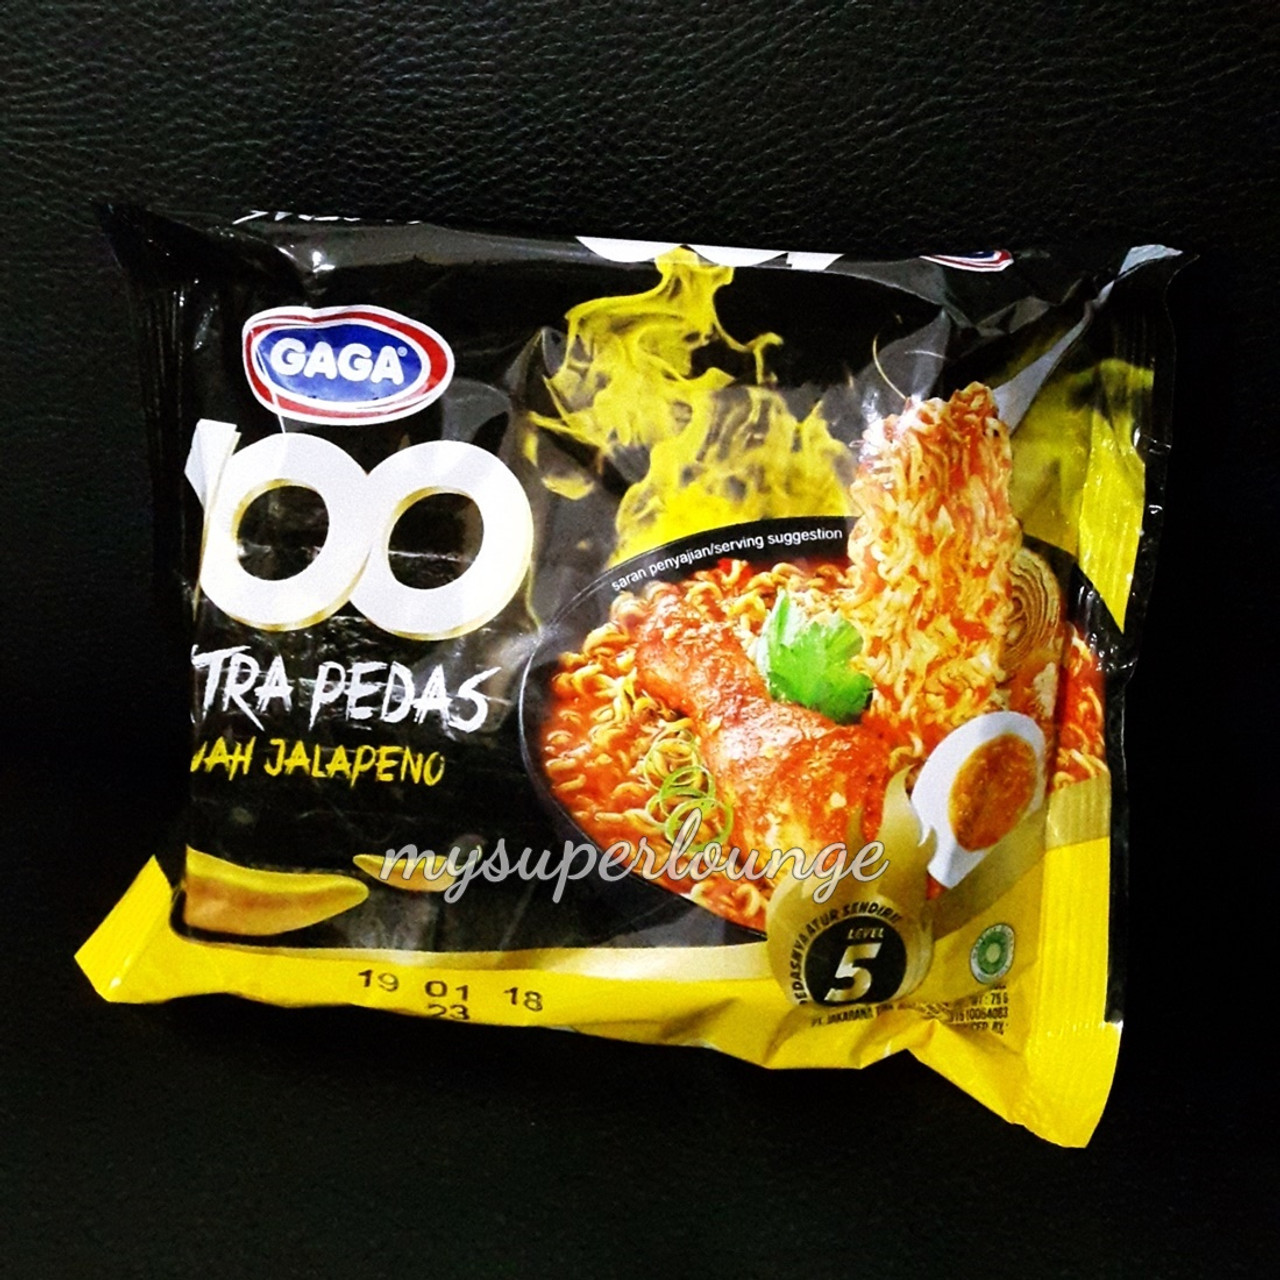 Gaga Instant Noodles 100 Extra Spicy Kuah Jalapeno 75g Pack Of 5